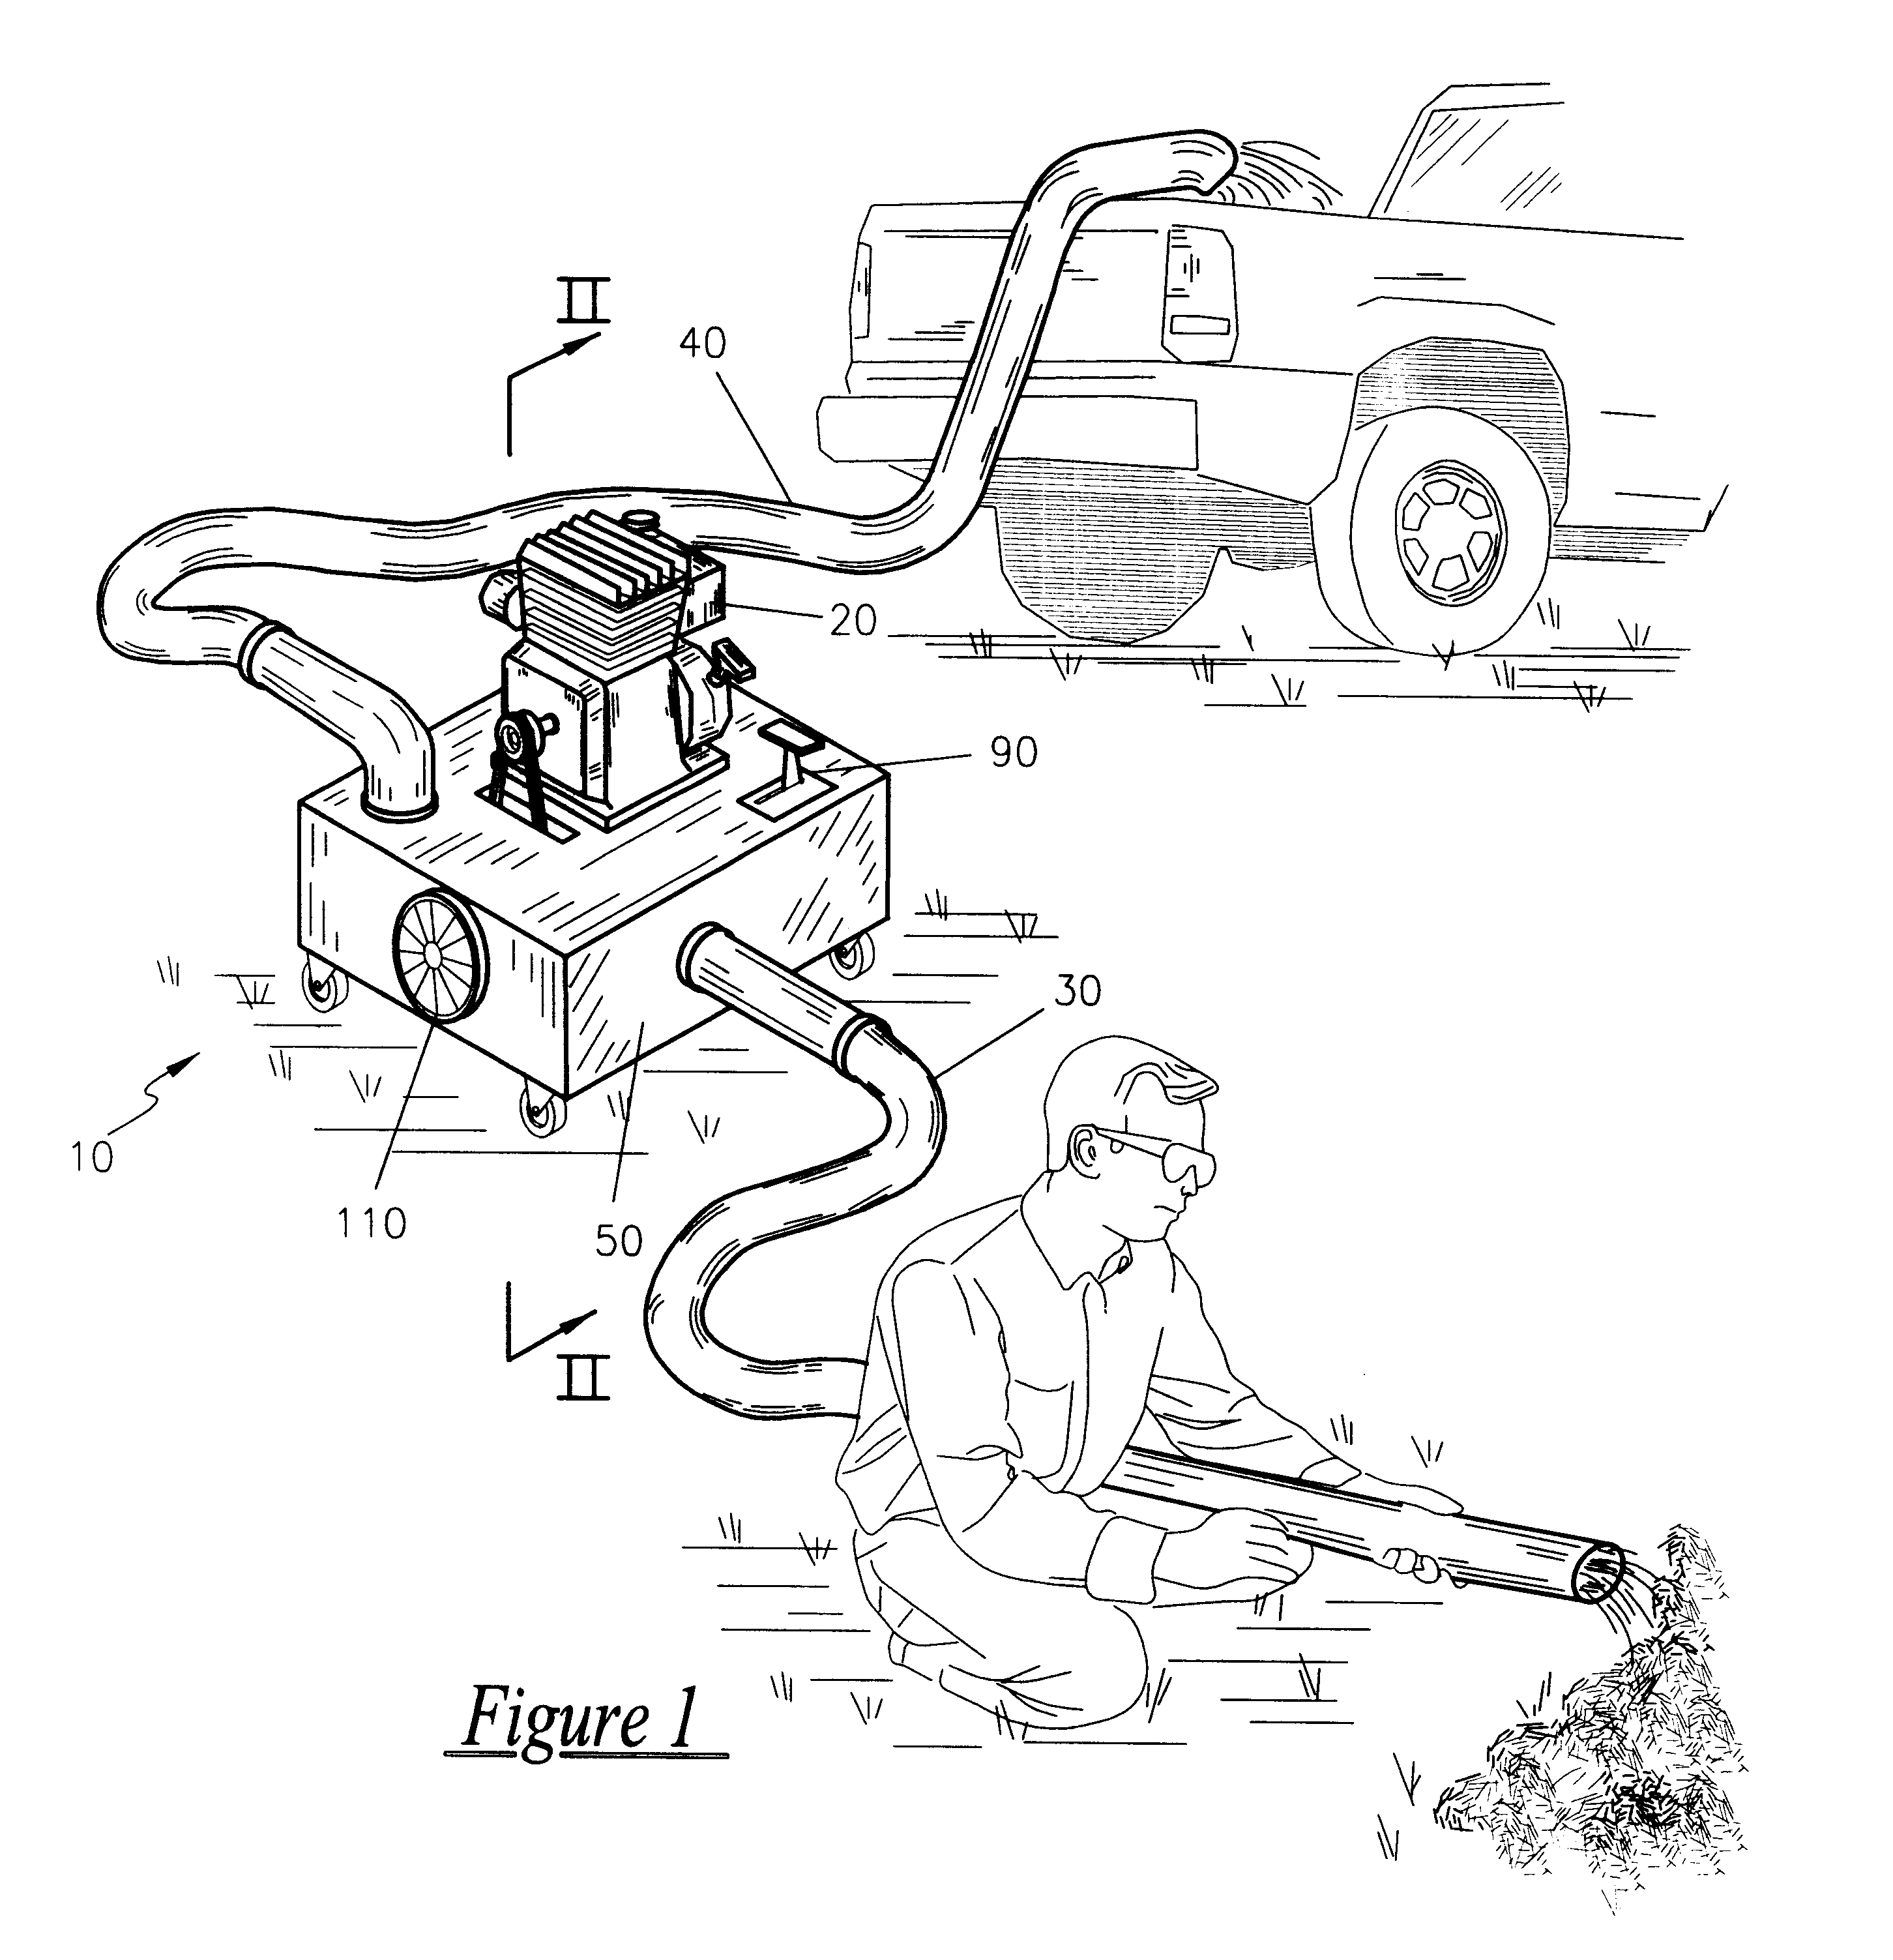 Portable, gas-powered, general purposes, pneumatic transport device